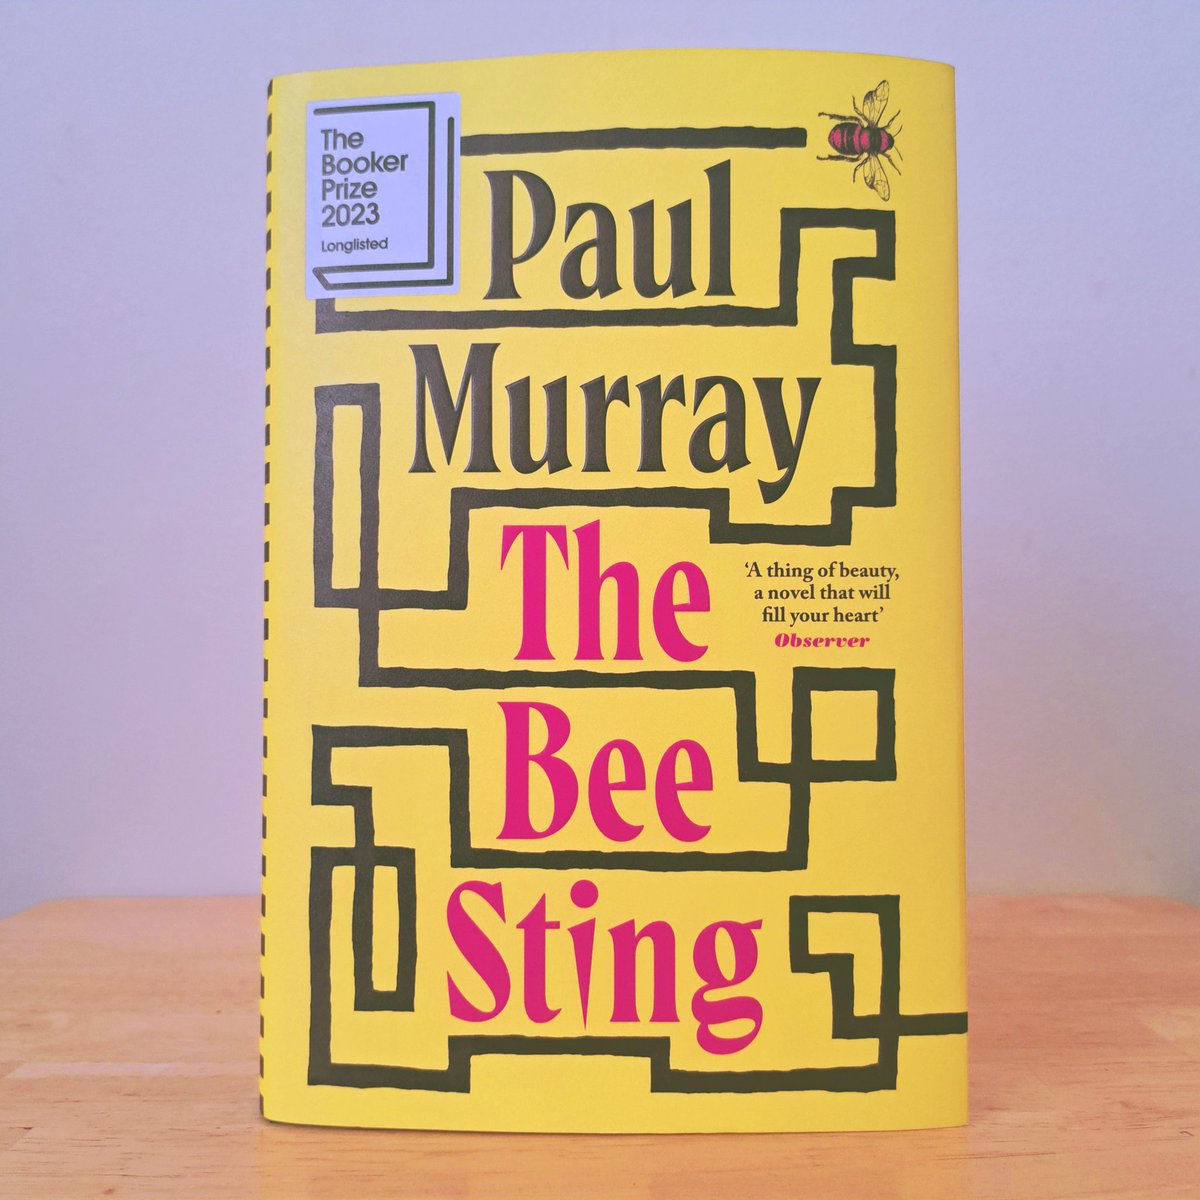 I have just finished #TheBeeSting by Paul Murray. 

I took my time with this family saga. As the threads unravel we discover more and more about this troubled and complex family. Brilliantly written and expertly crafted. This is fiction at its very finest. Essential reading!